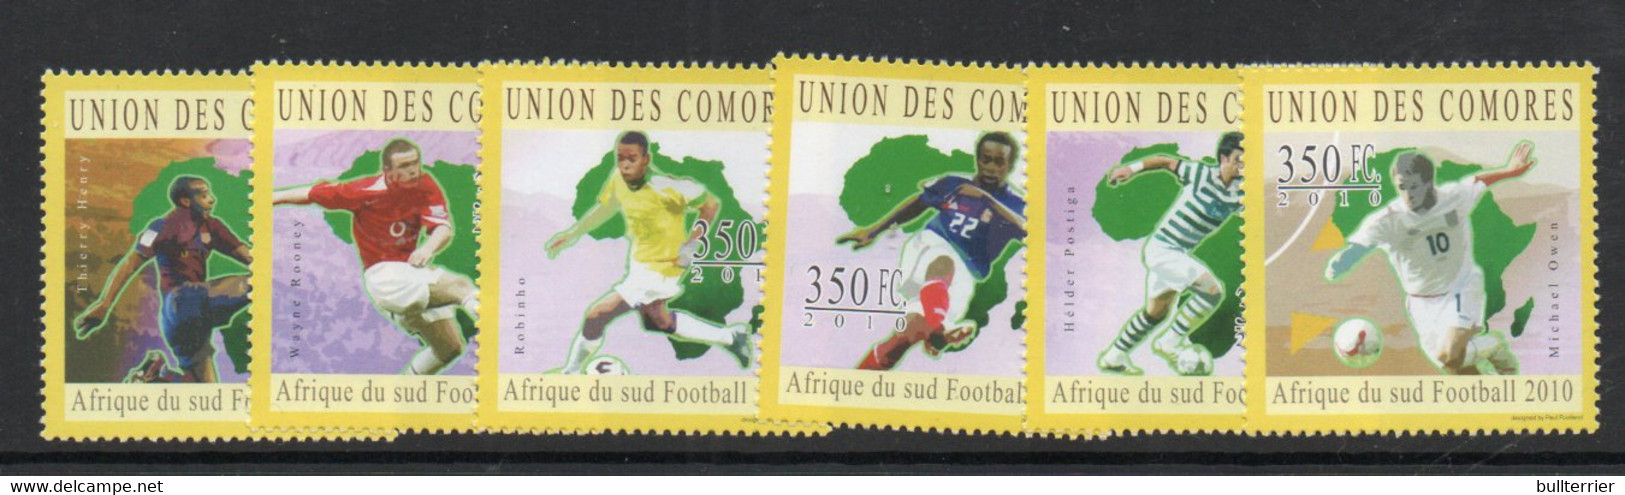 SOCCER - COMOROS - 2010 - SOUTH AFRICA WORLD CUP  SET  OF 4  MINT NEVER HINGED - 2010 – Südafrika